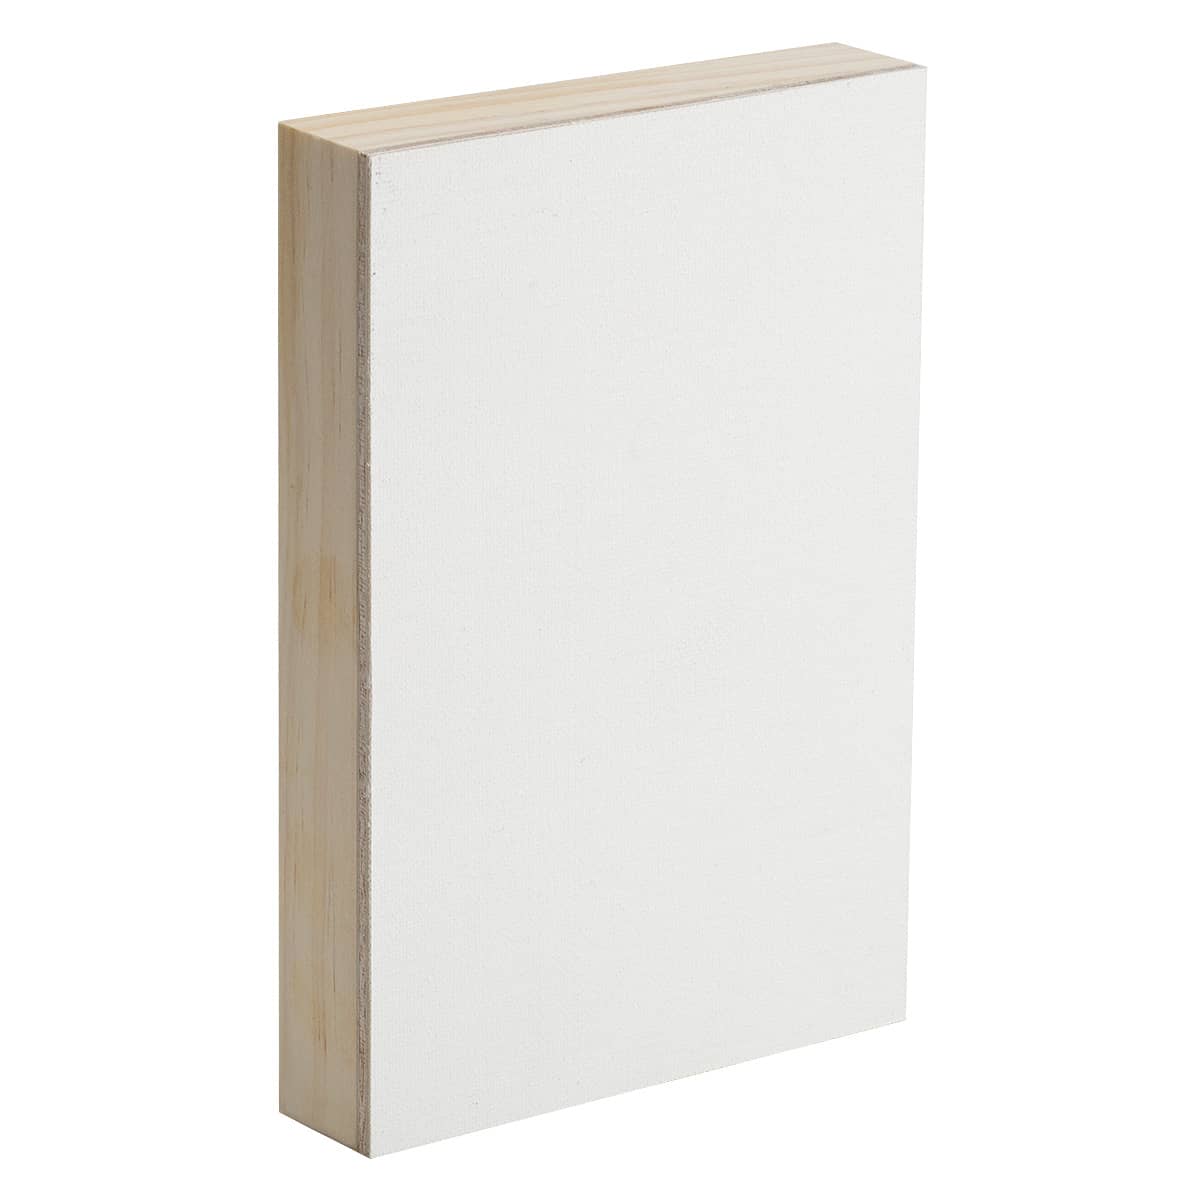 New York Central Professional Canvas Panel With Claessens 15DP Oil Primed Linen 1-5/8" Deep - 11x14"